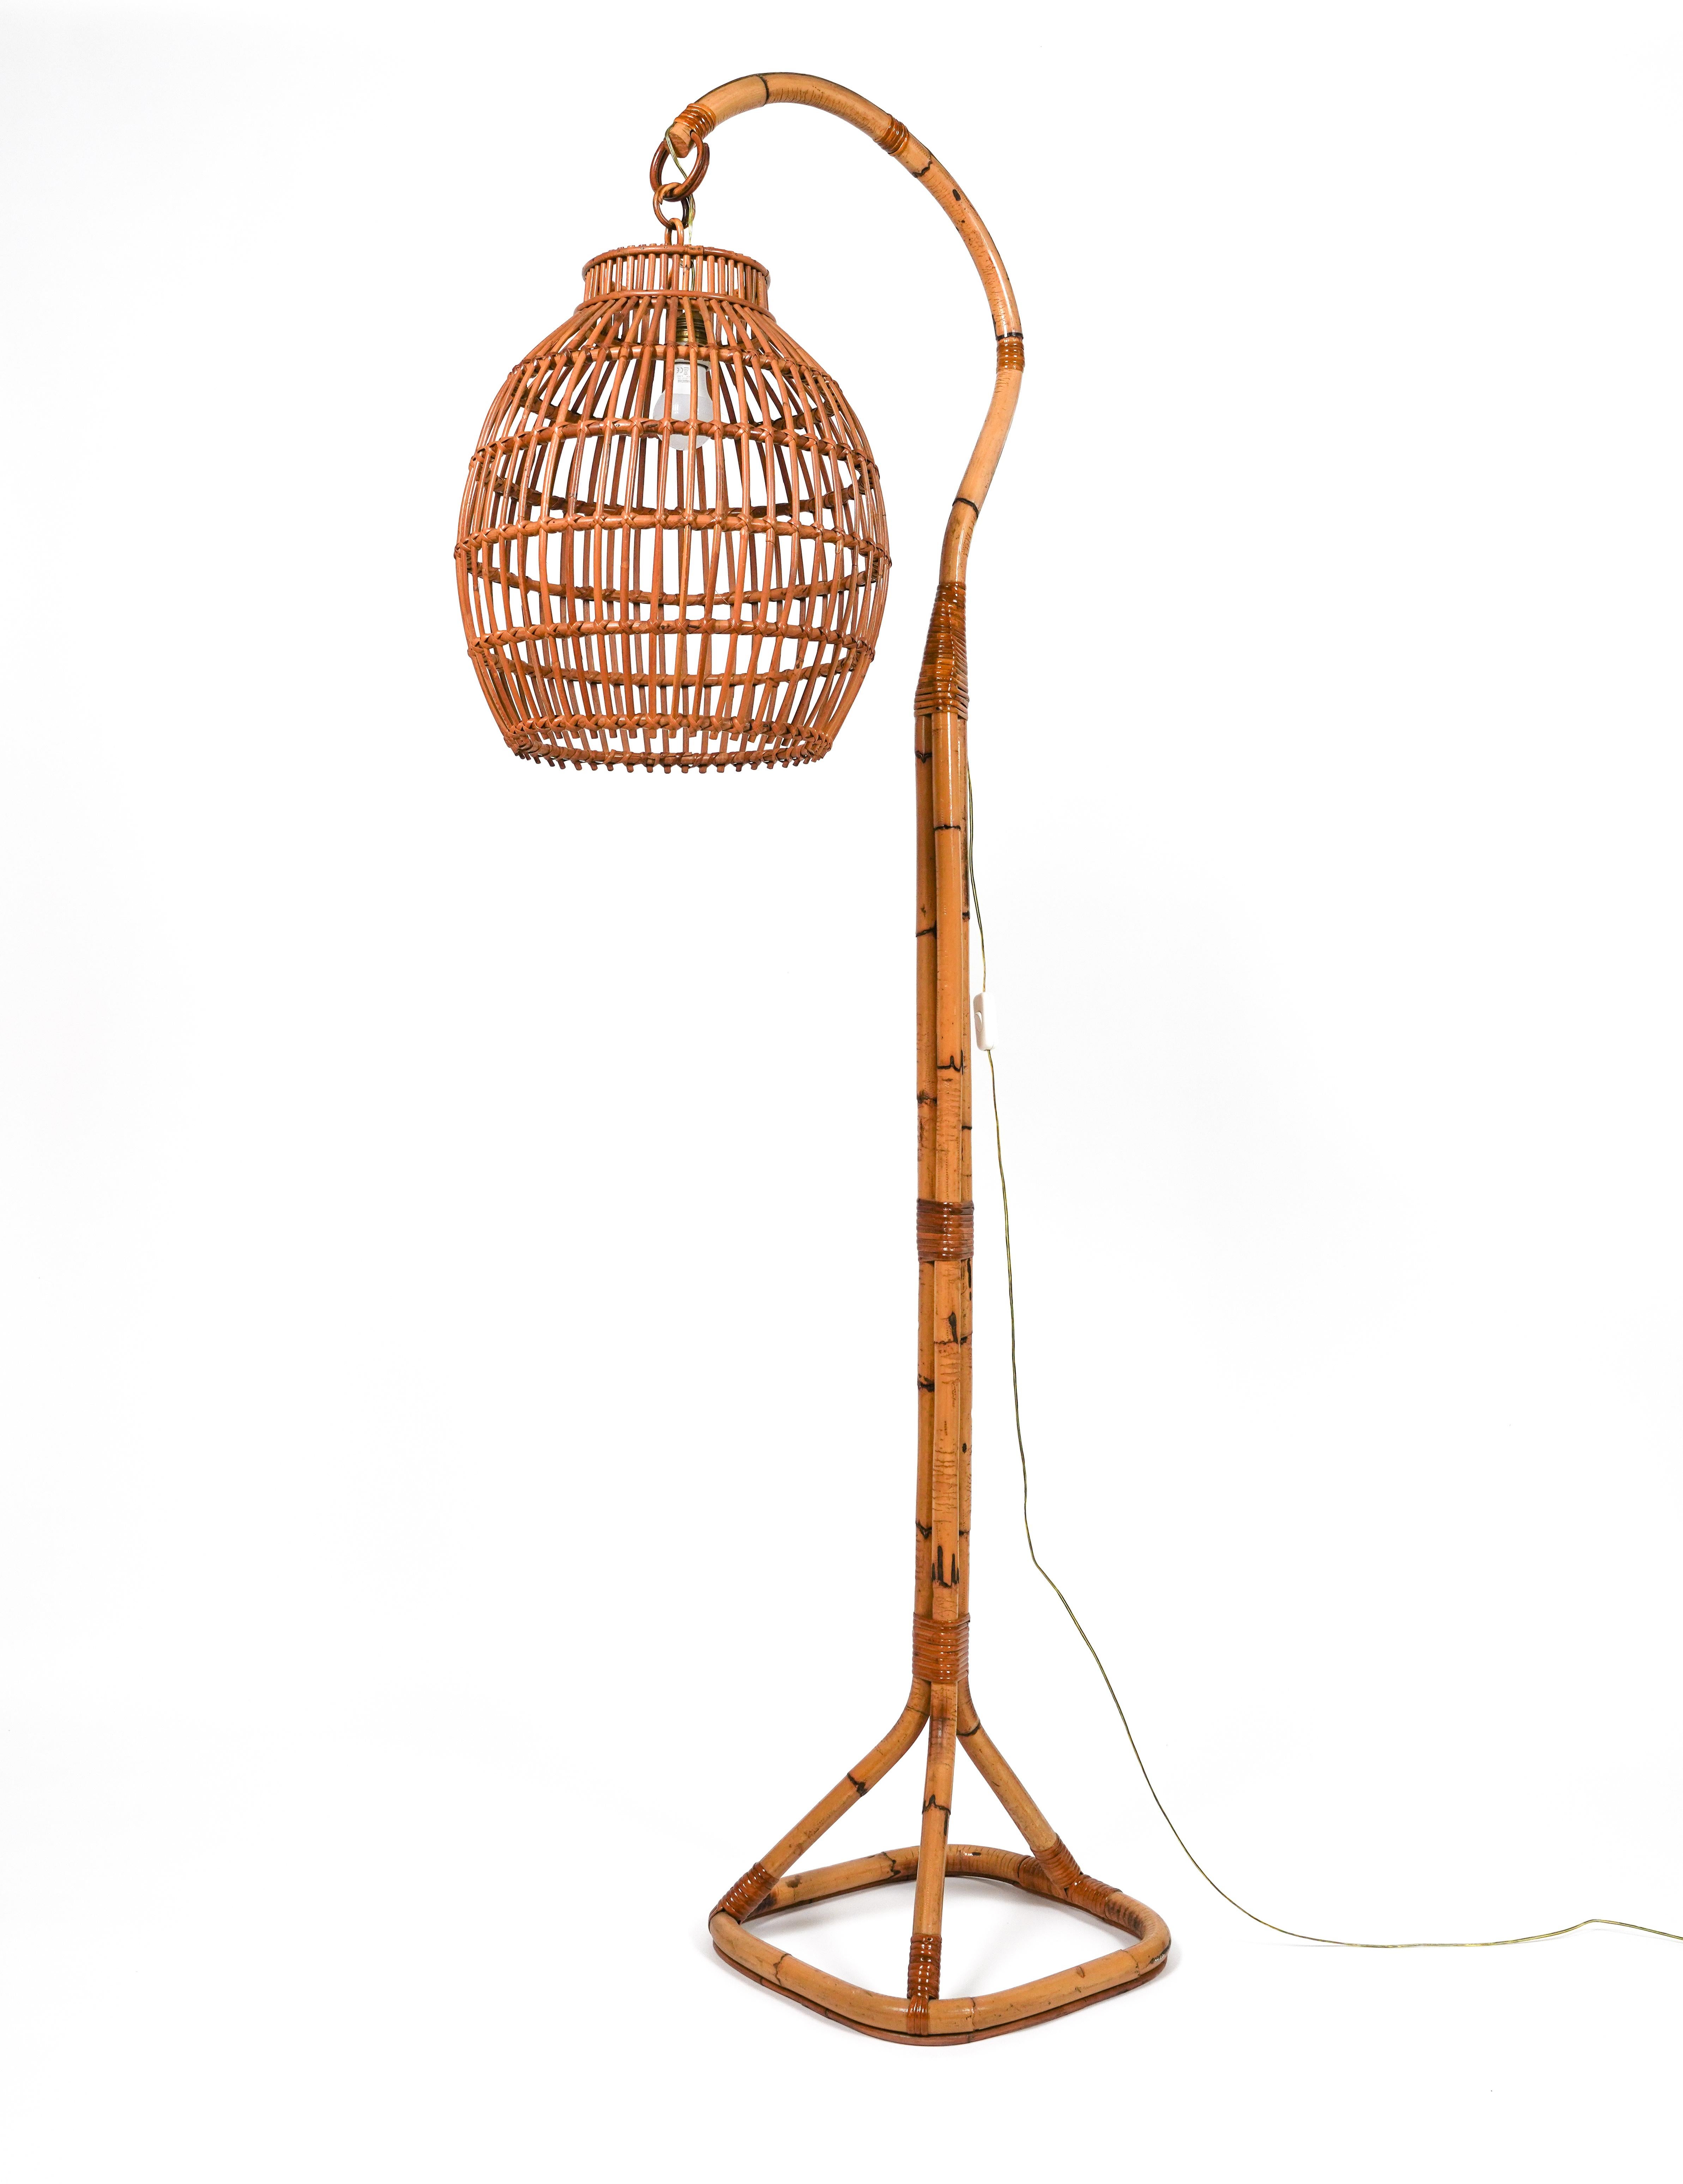 Midcentury Rattan and Bamboo Floor Lamp Louis Sognot Style, Italy 1960s For Sale 1